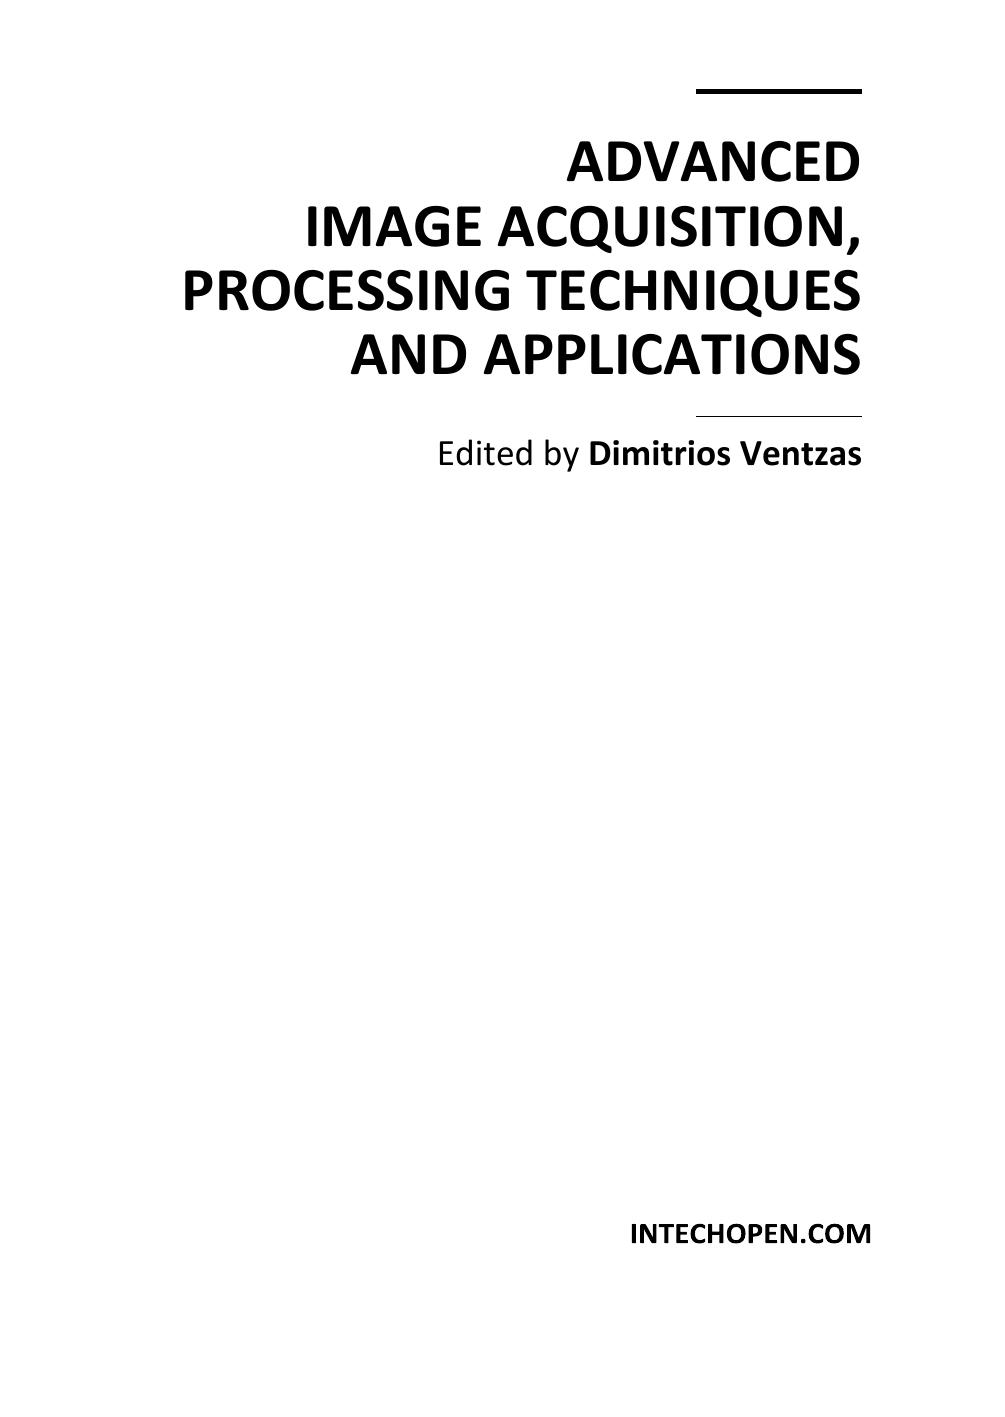 Advanced Image Acquisition  Processing Techniques and Applications 2012.pdf